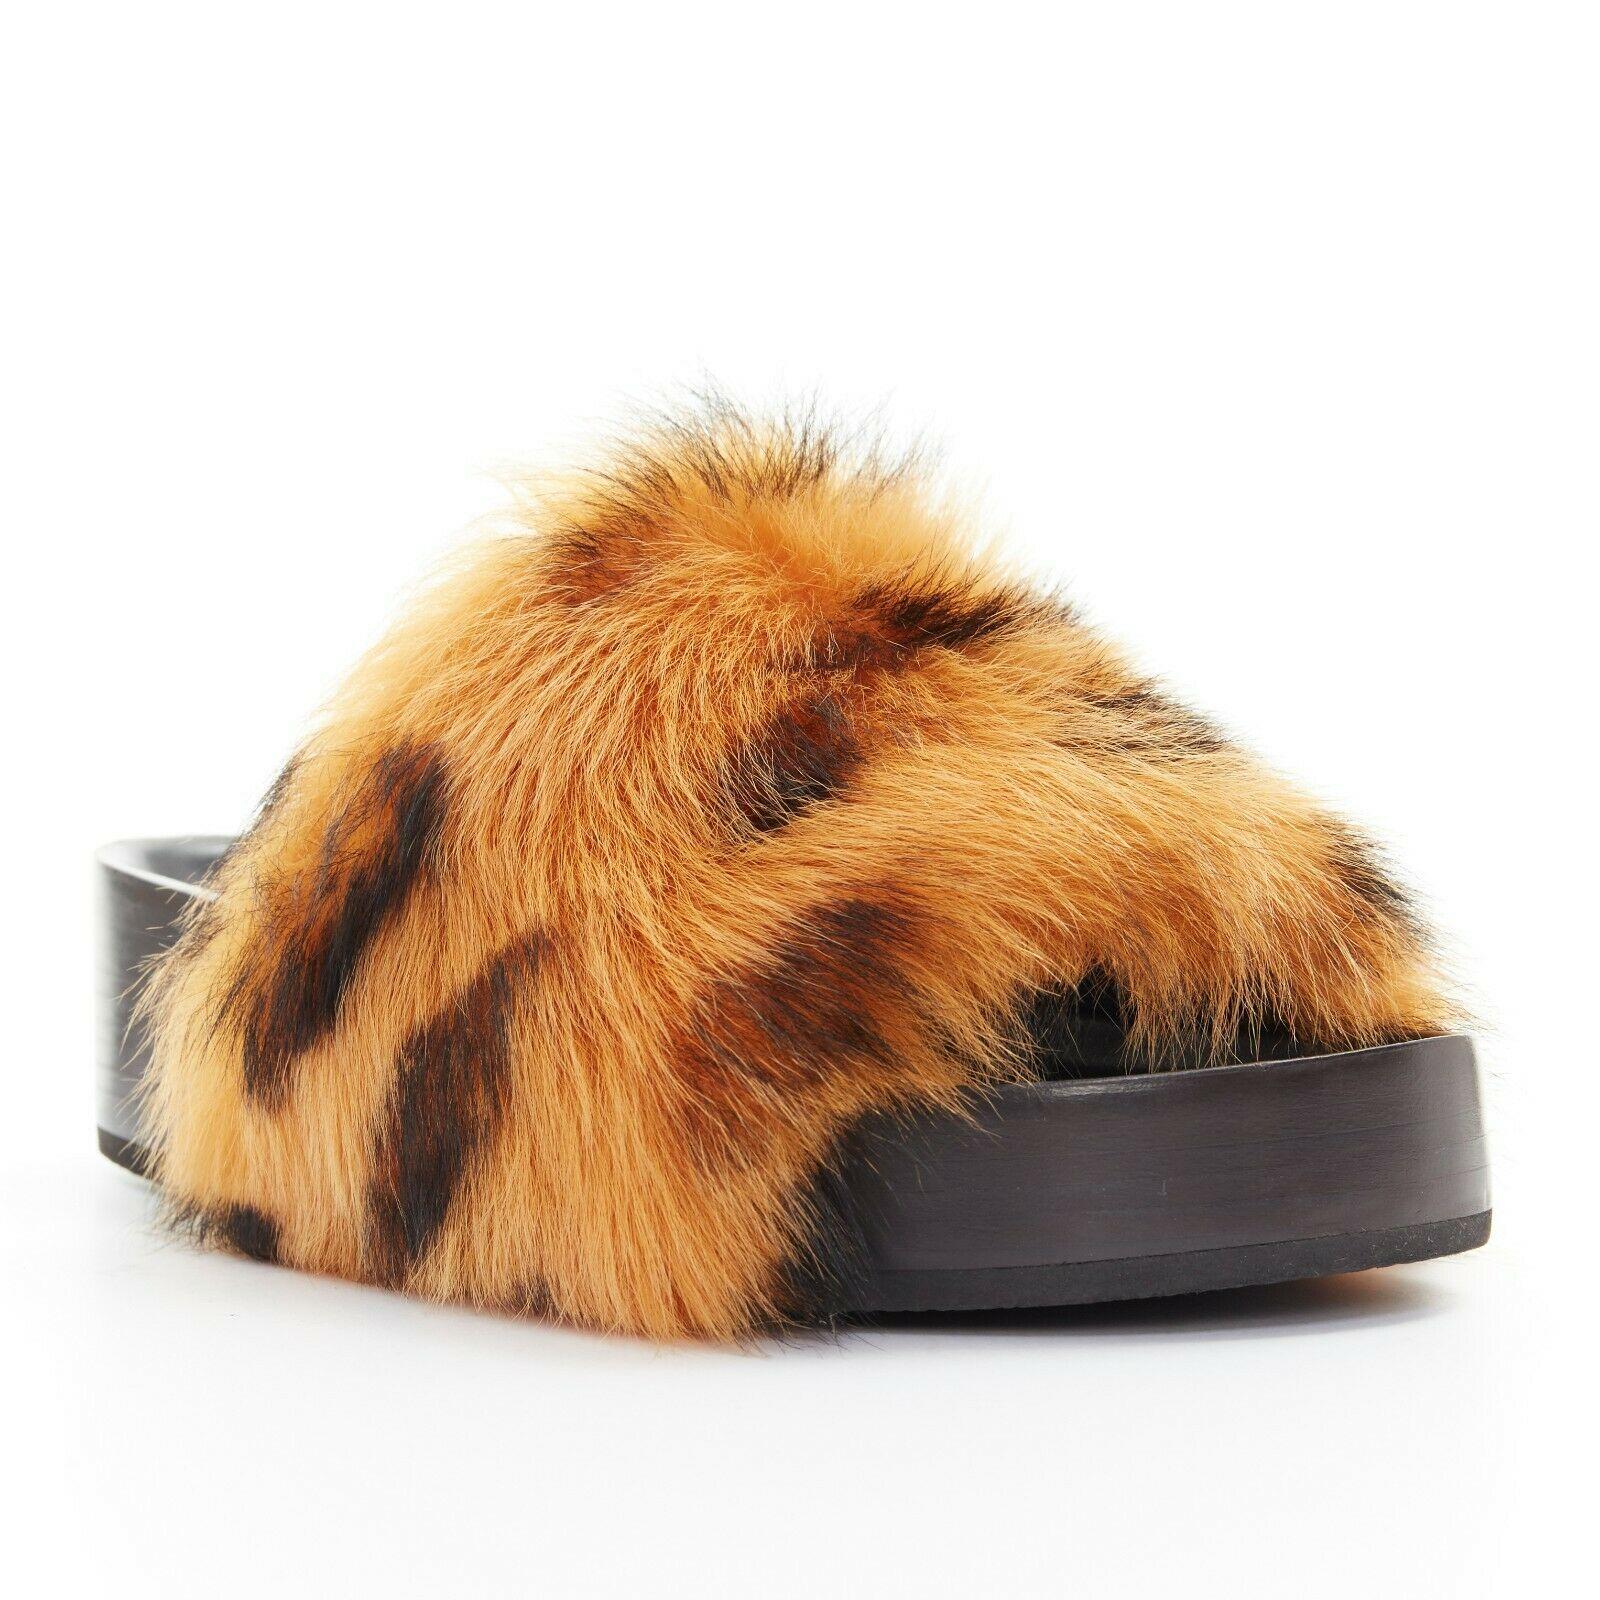 CELINE PHOEBE PHILO Boxy leopard print faux fur open toe chunky slide EU37

CELINE BY PHOEBE PHILO
Boxy flat. Brown and black leopard spot faux fur strap. Dark brown double stacked leather outsole. Moulded footbed. Slide sandals. Made in